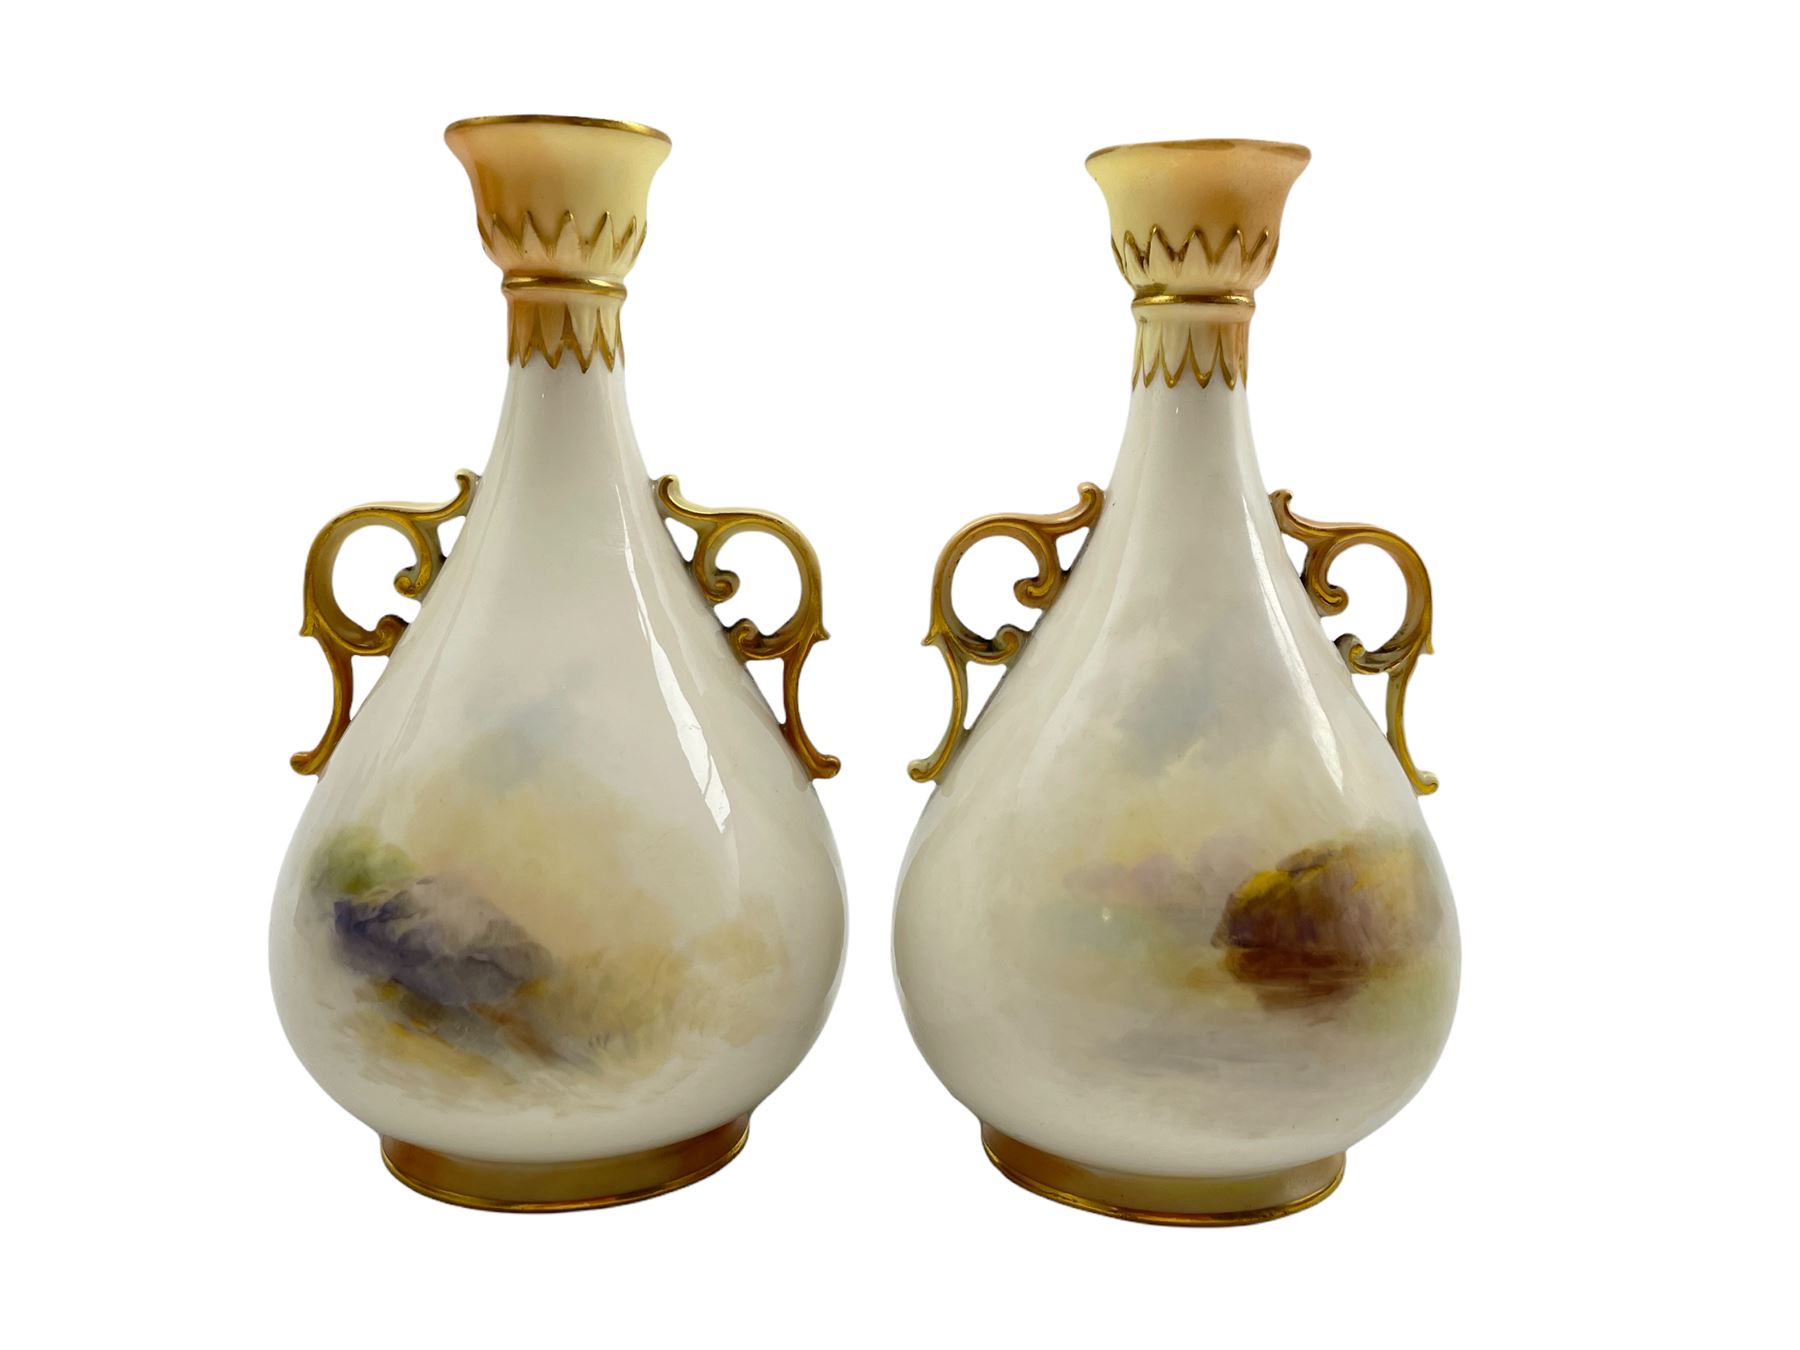 Pair of Royal Worcester porcelain twin handled vases circa 1909 - Image 2 of 3